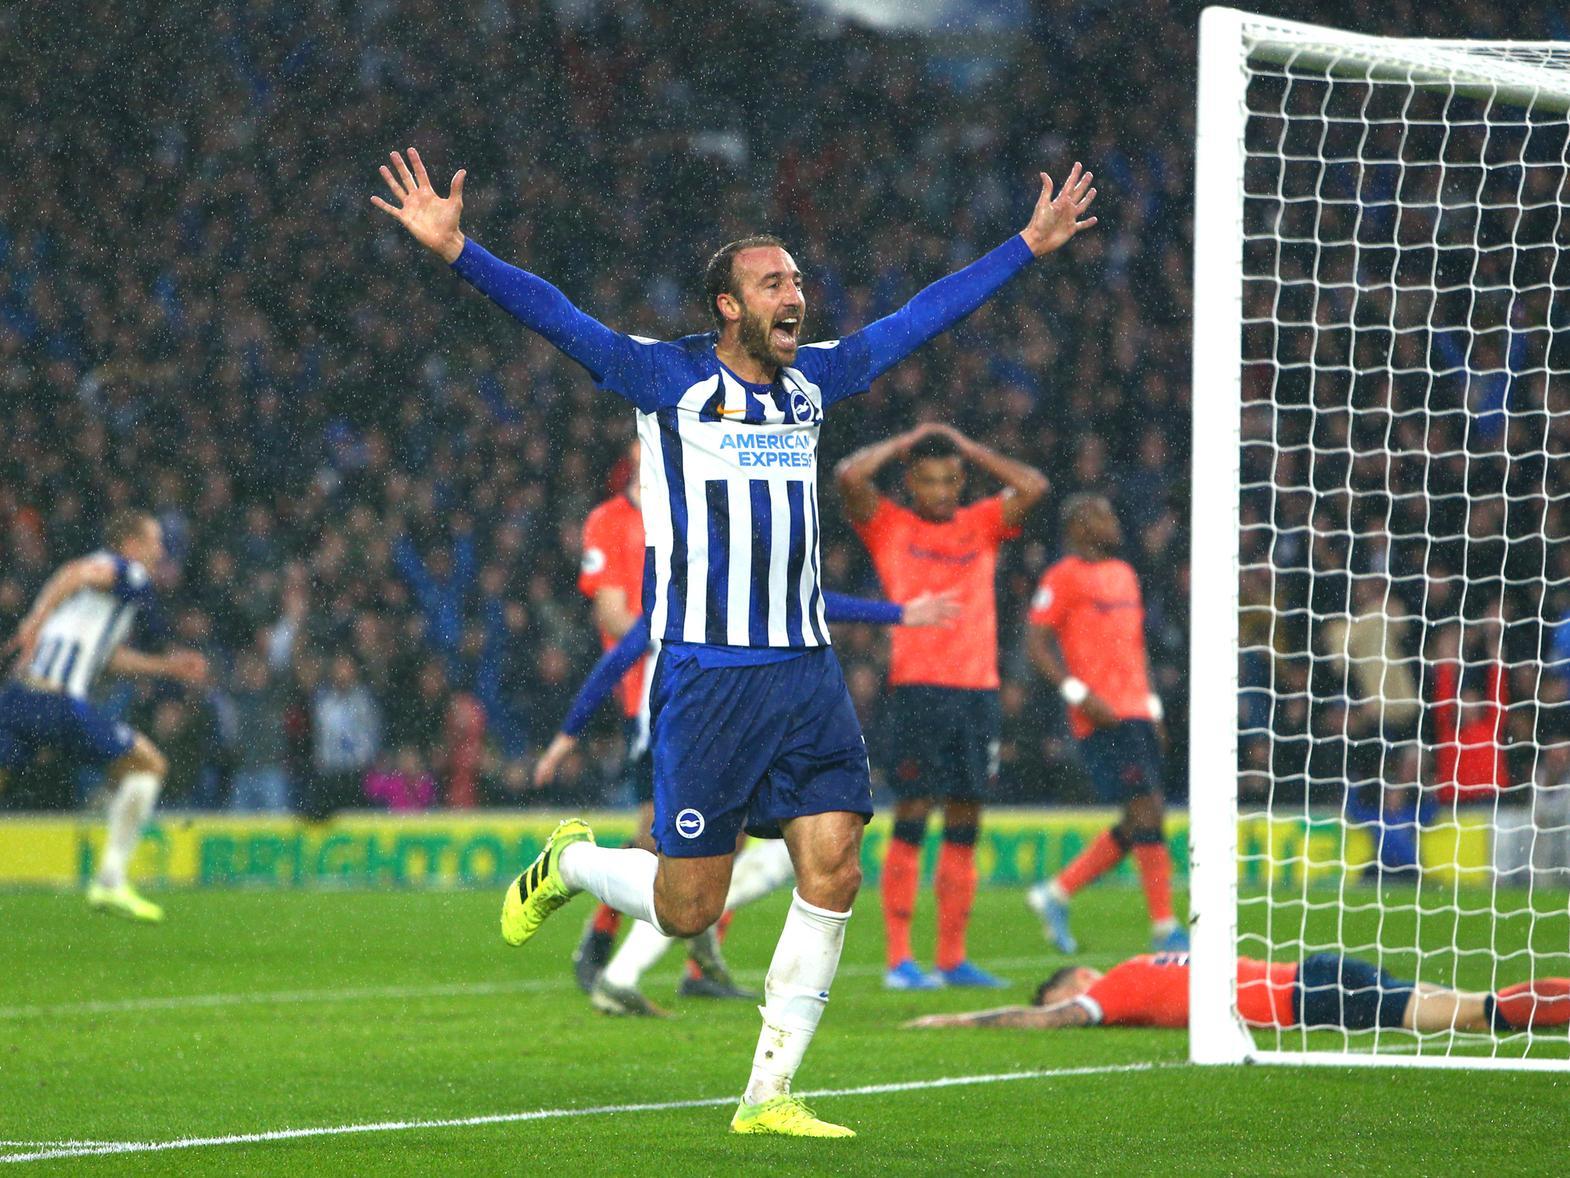 Nottingham Forest are now odds-on favourites to land Brighton's veteran striker Glenn Murray this month, with Reading and Aston Villa trailing behind them in the distance. (Sky Bet)